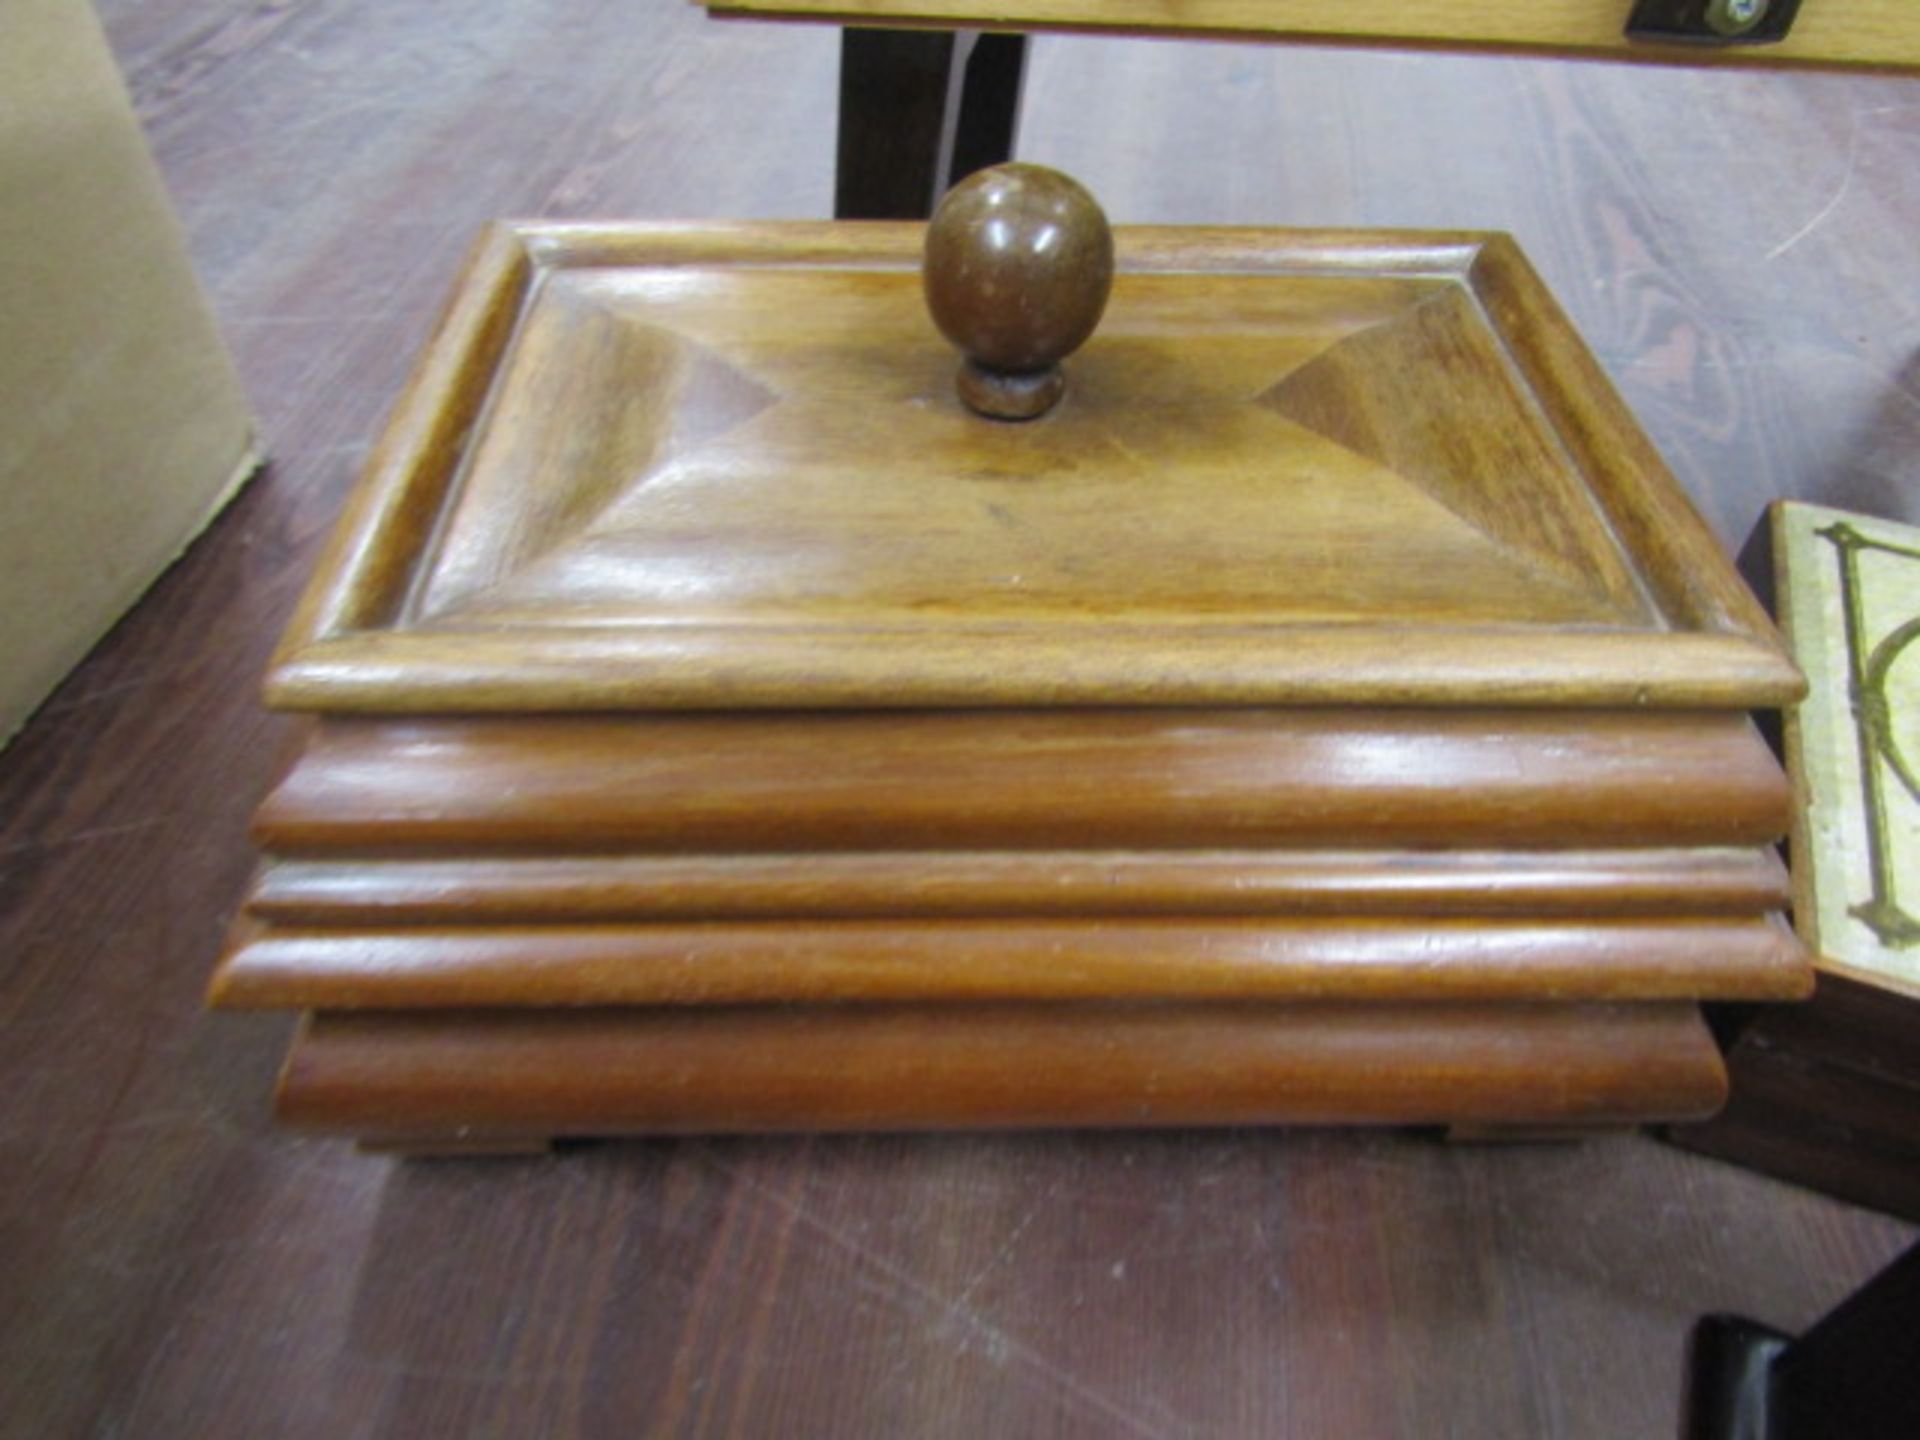 Sewing boxes, one cantilever plus 2 pictures - Image 3 of 9